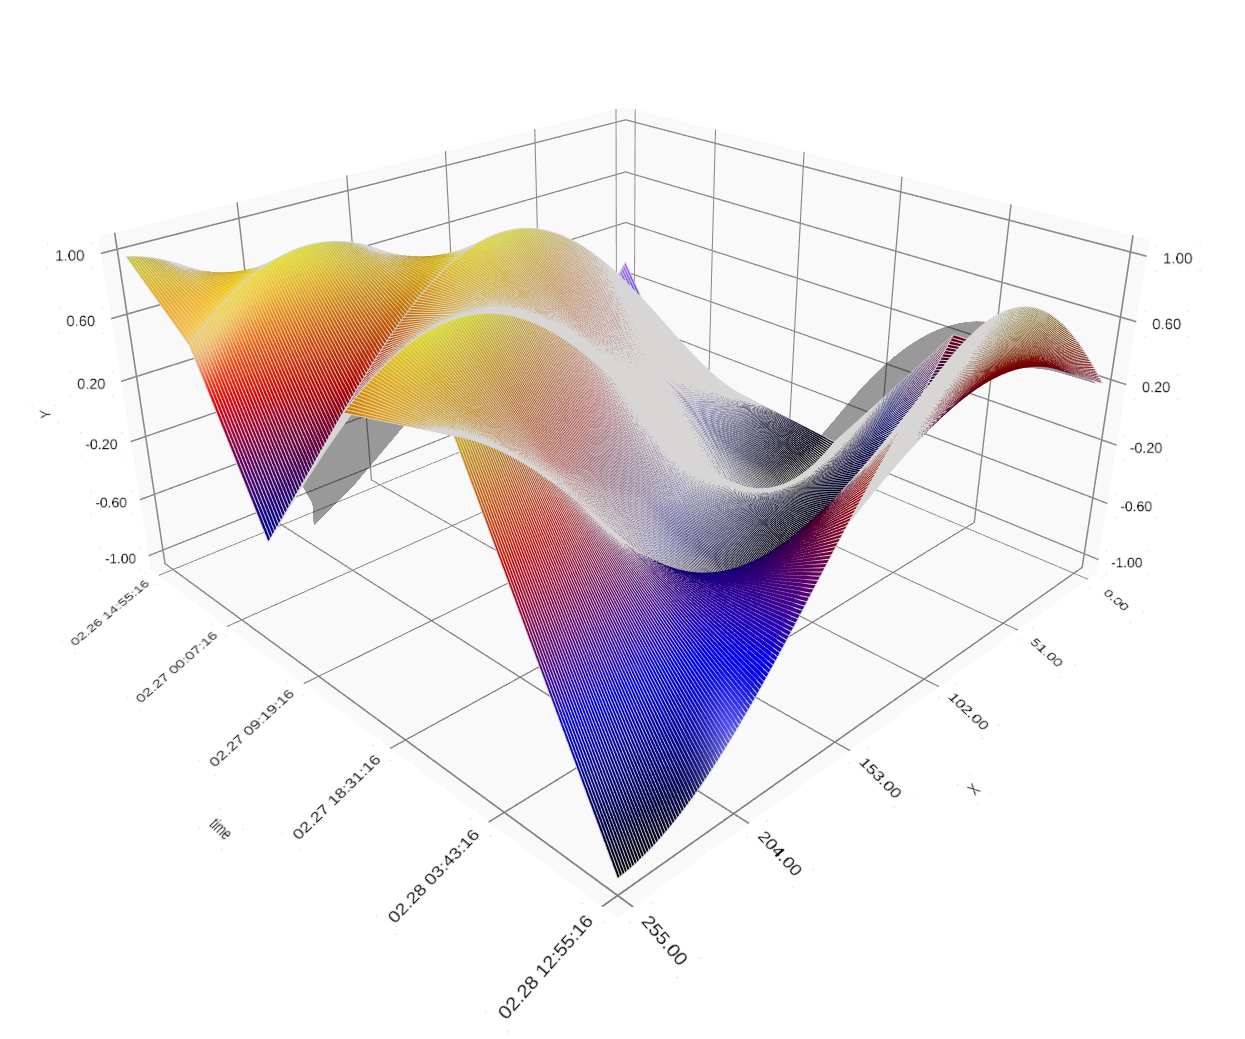 The 3D plot offered by the <a href="https://github.com/ELETTRA-SincrotroneTrieste/qutimearray3dplotplugin">qutimearray3dplotplugin</a> shows historical data